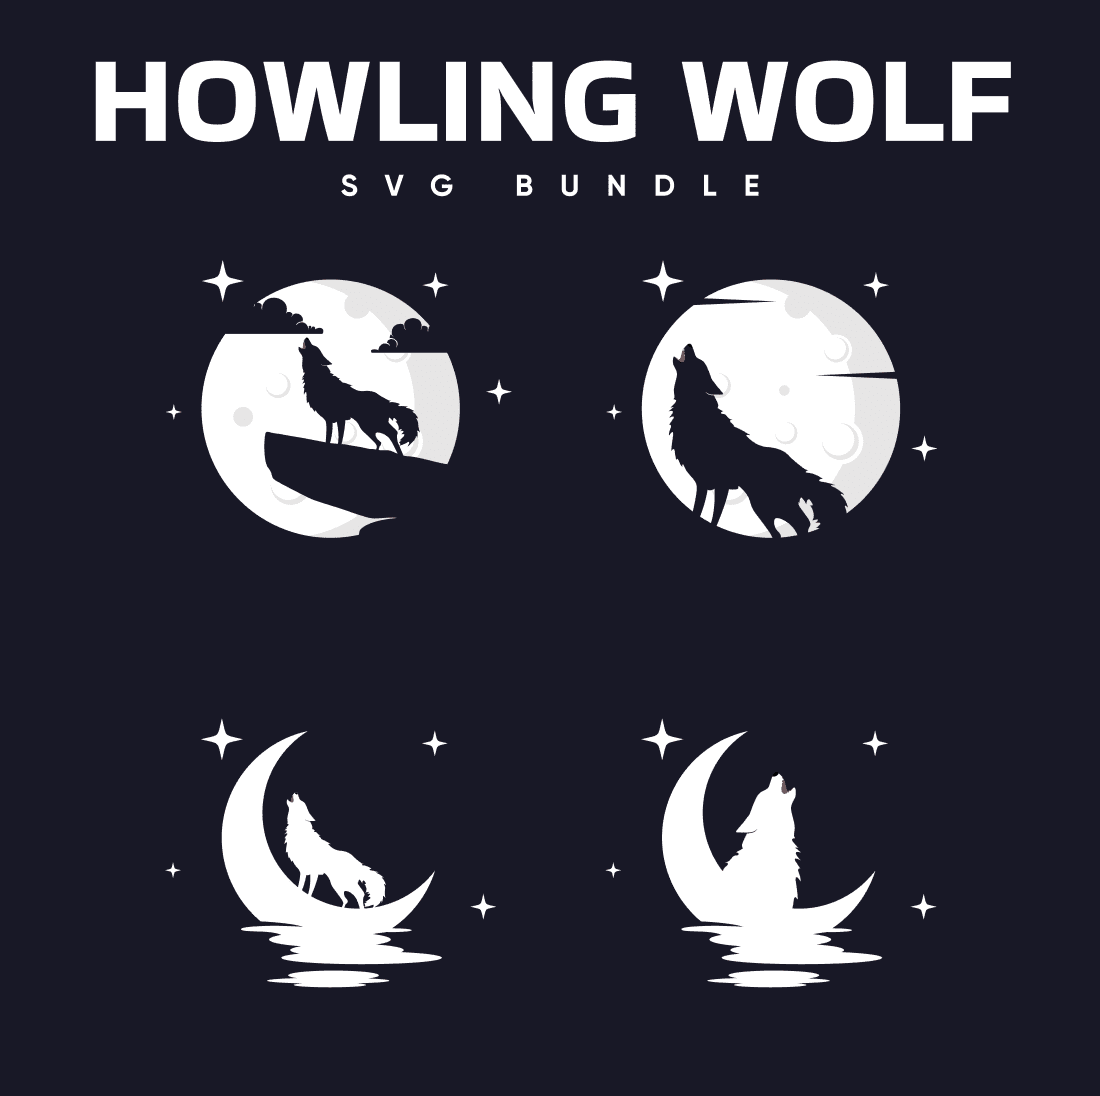 Howling Wolf Svg Free.